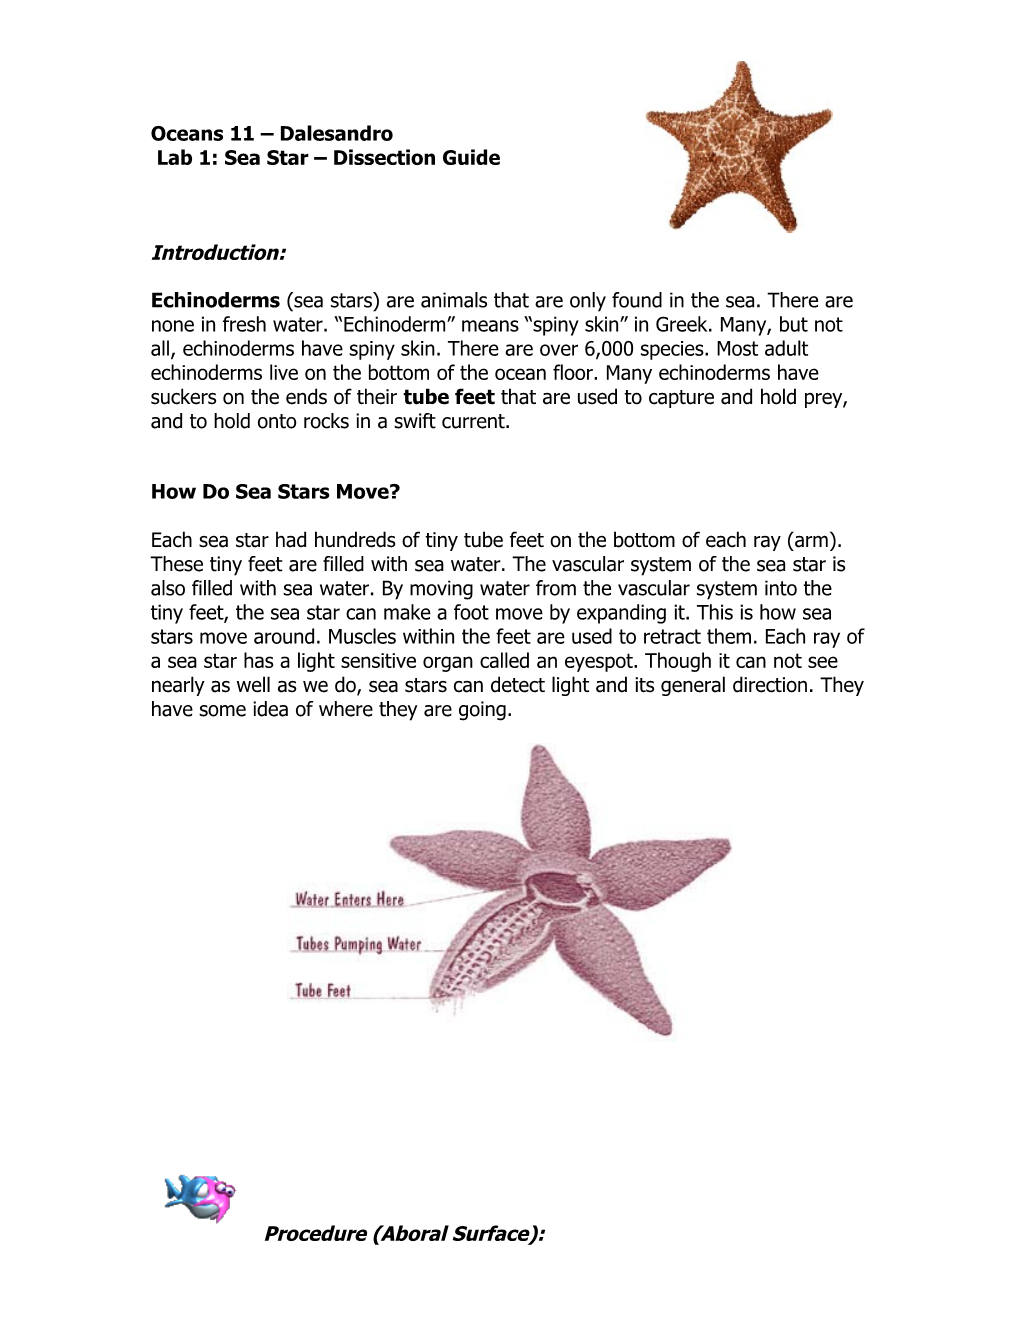 1. Obtain a Preserved Sea Star and Rinse Off Any Preservative with Water